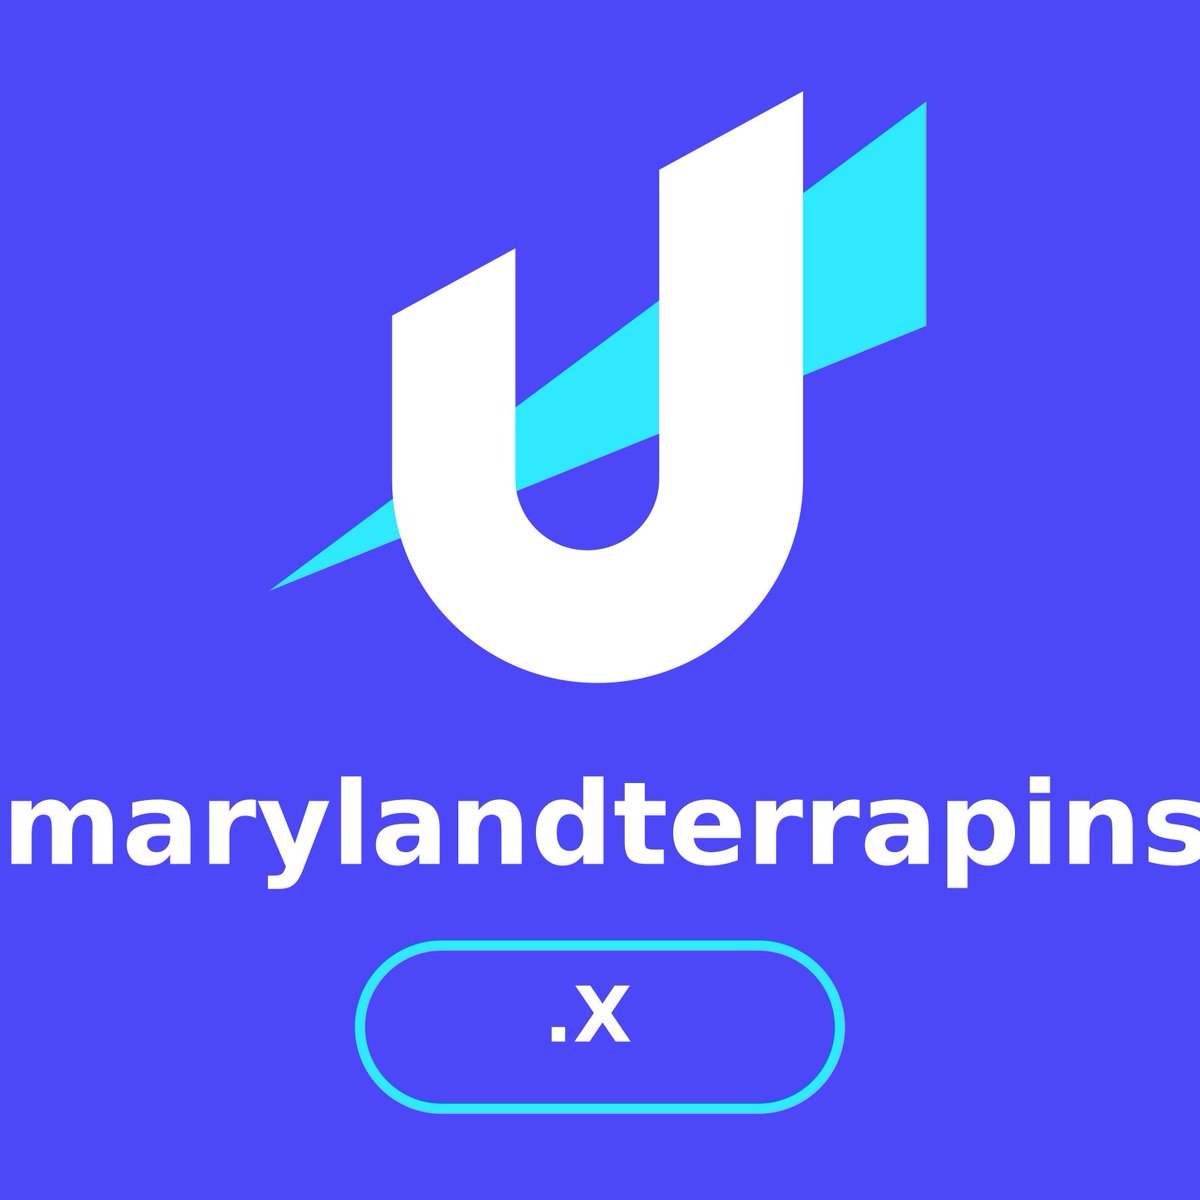 marylandterrapins.x sold for 9 MATIC(~$6.28). From bank369.wallet to 0xefb73e47099485c72b7678cb59fb0da7dacf173f. unstoppabledomains.com/search?searchT…. #unstoppabledomains #domains #crypto #nft